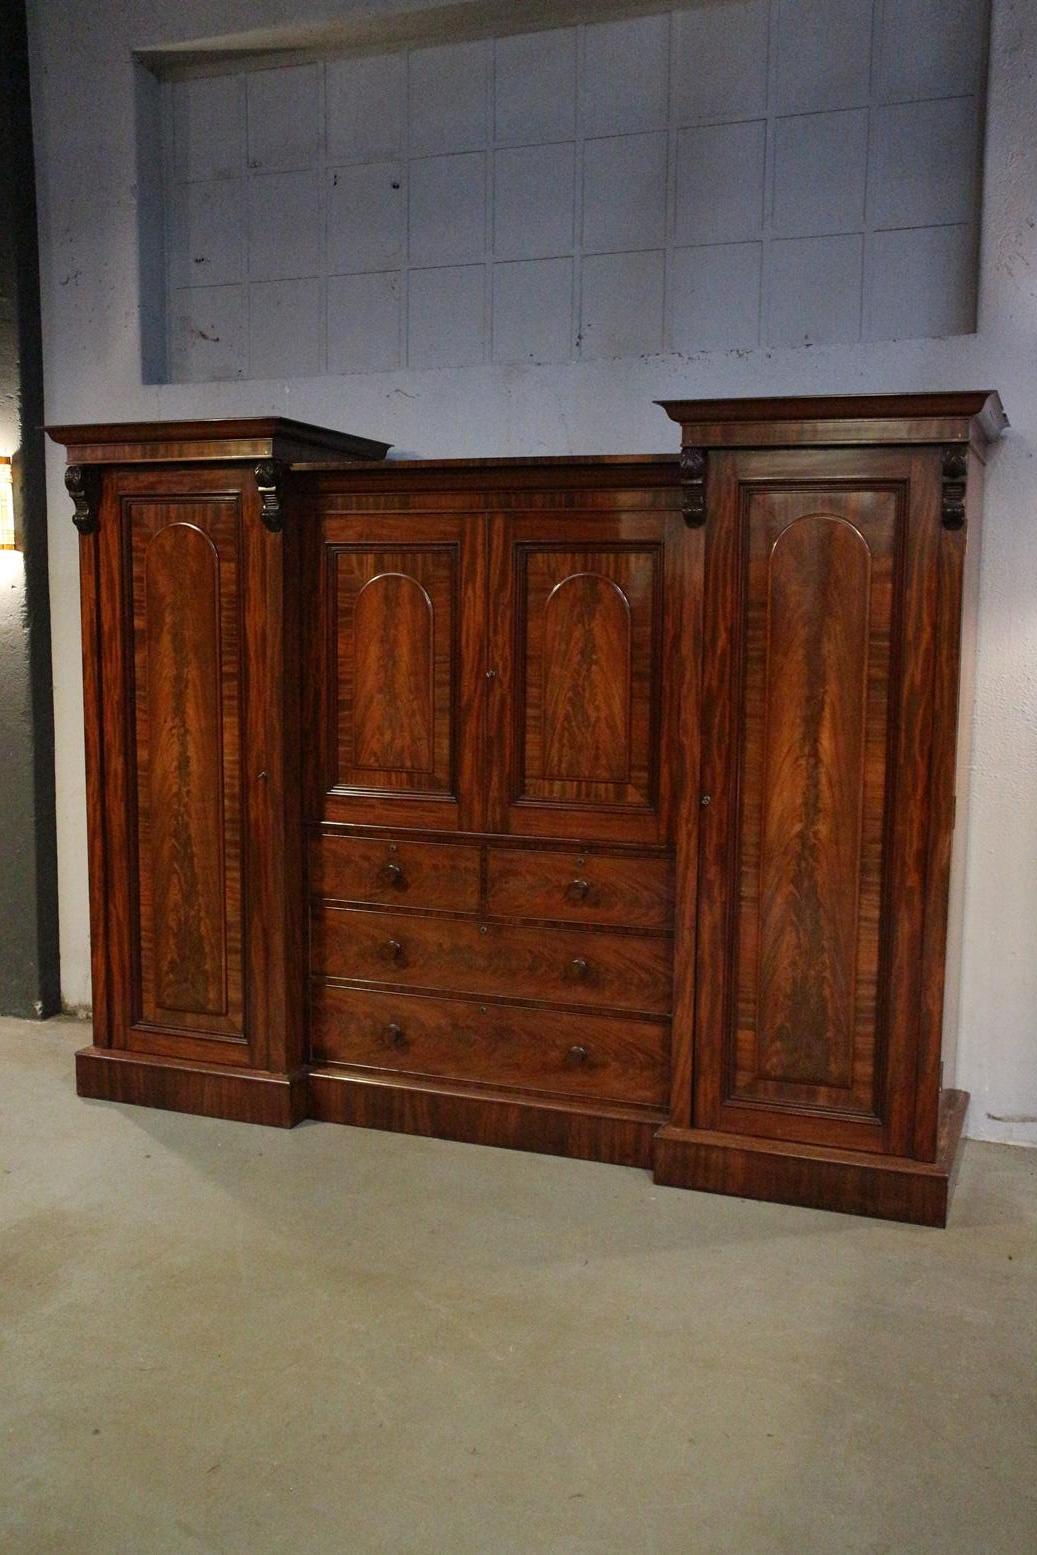 Beautiful and impressive mahogany wardrobe (wardrobe) in perfect and completely original condition. unbelievably nice quality and still very practical. Behind the middle doors are open pull-out drawers.
Origin: England, ca. 1840-1860
Mate. Bro.